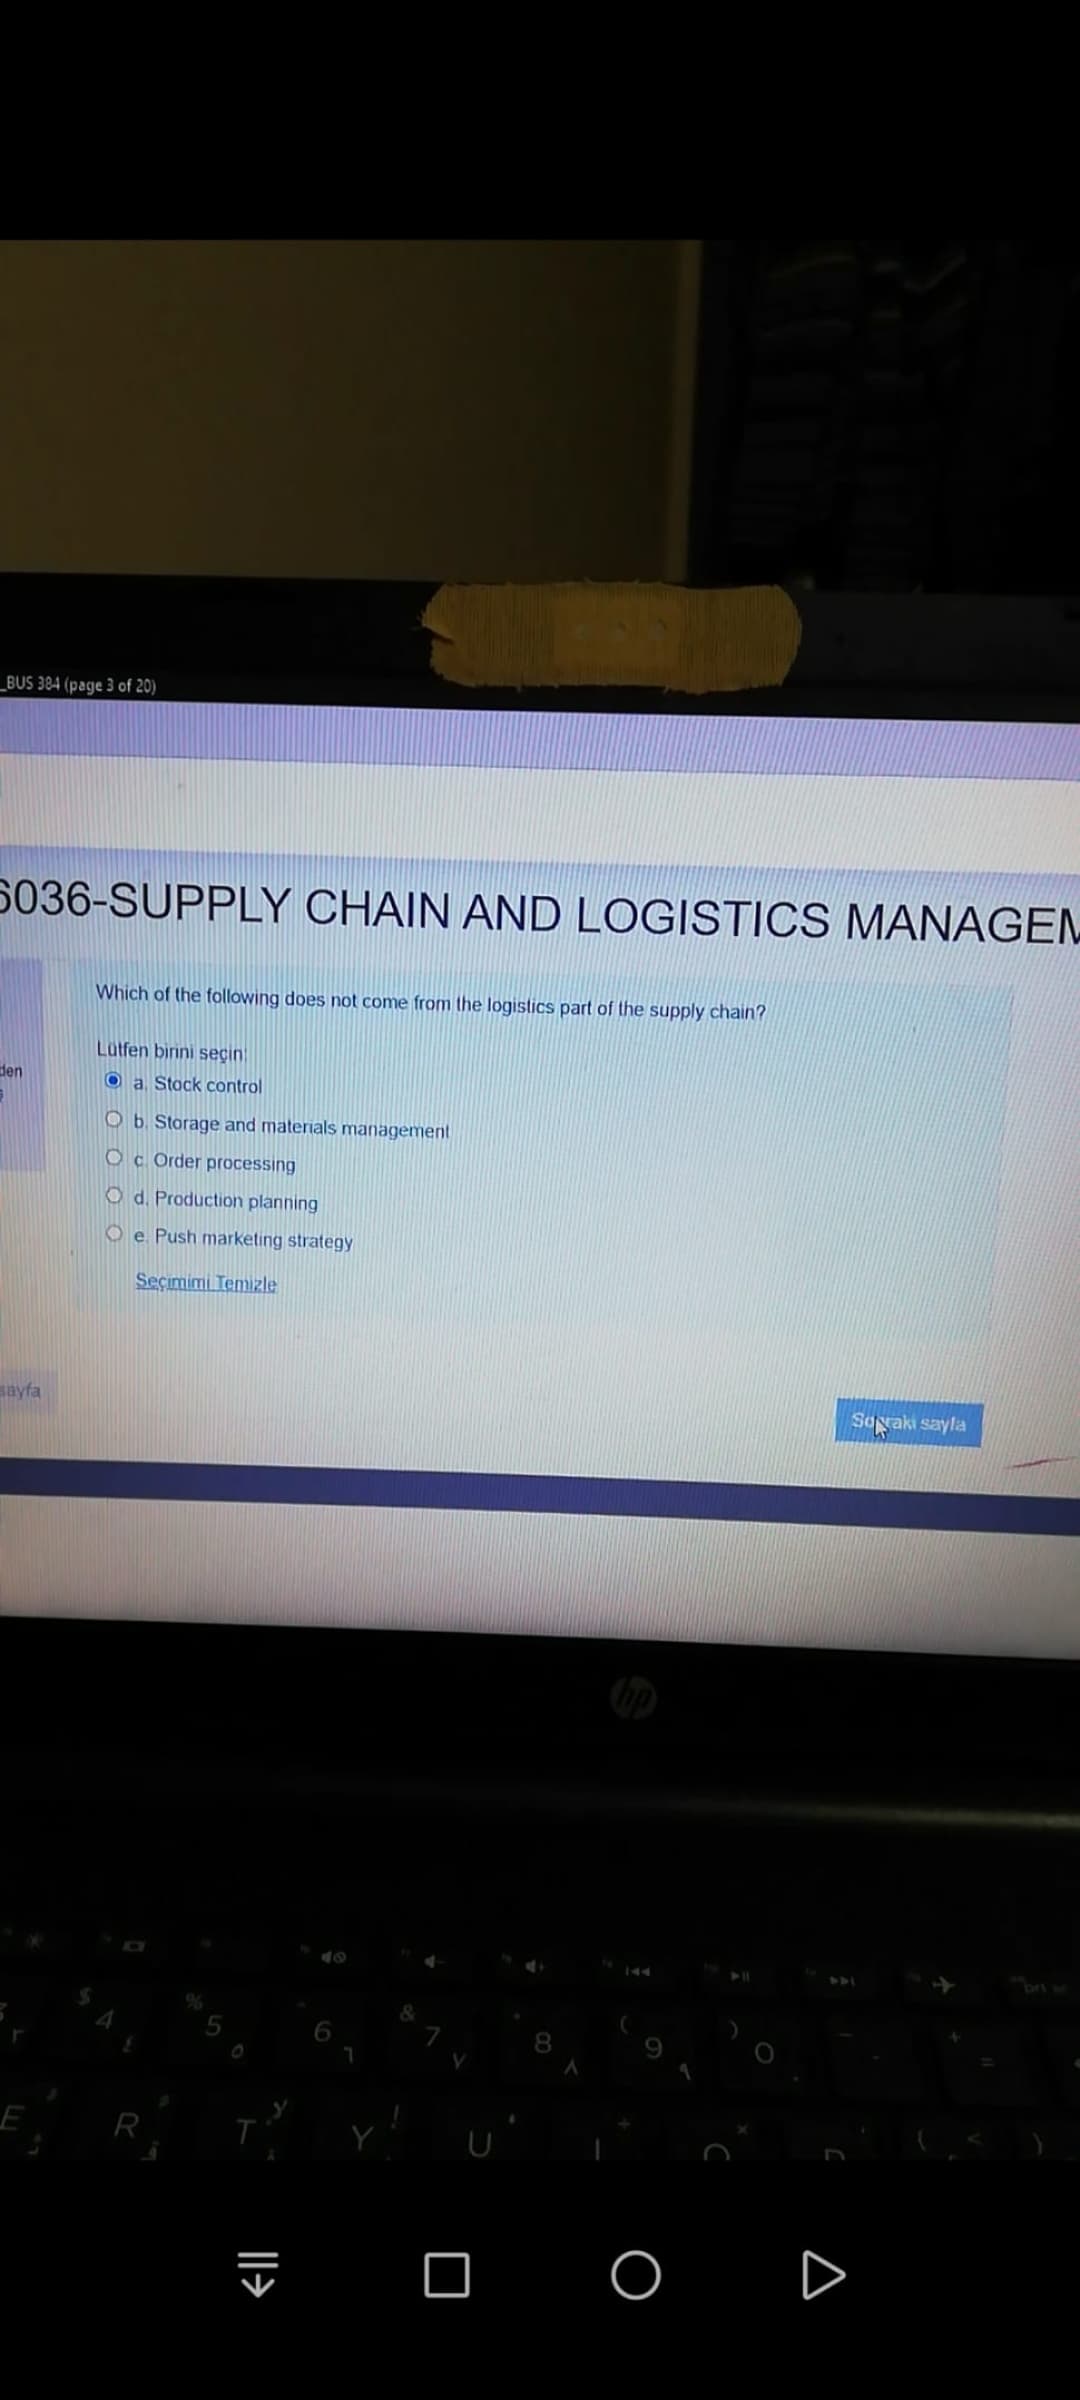 _BUS 384 (page 3 of 20)
5036-SUPPLY CHAIN AND LOGISTICS MANAGEM
Which of the following does not come from the logistics part of the supply chain?
Lutfen binini seçin
den
O a Stock control
O b. Storage and materials management
Oc Order processing
O d. Production planning
O e Push marketing strategy
Seçimimi Temizle
sayfa
Soyaki sayla
144
R
O O
||>
